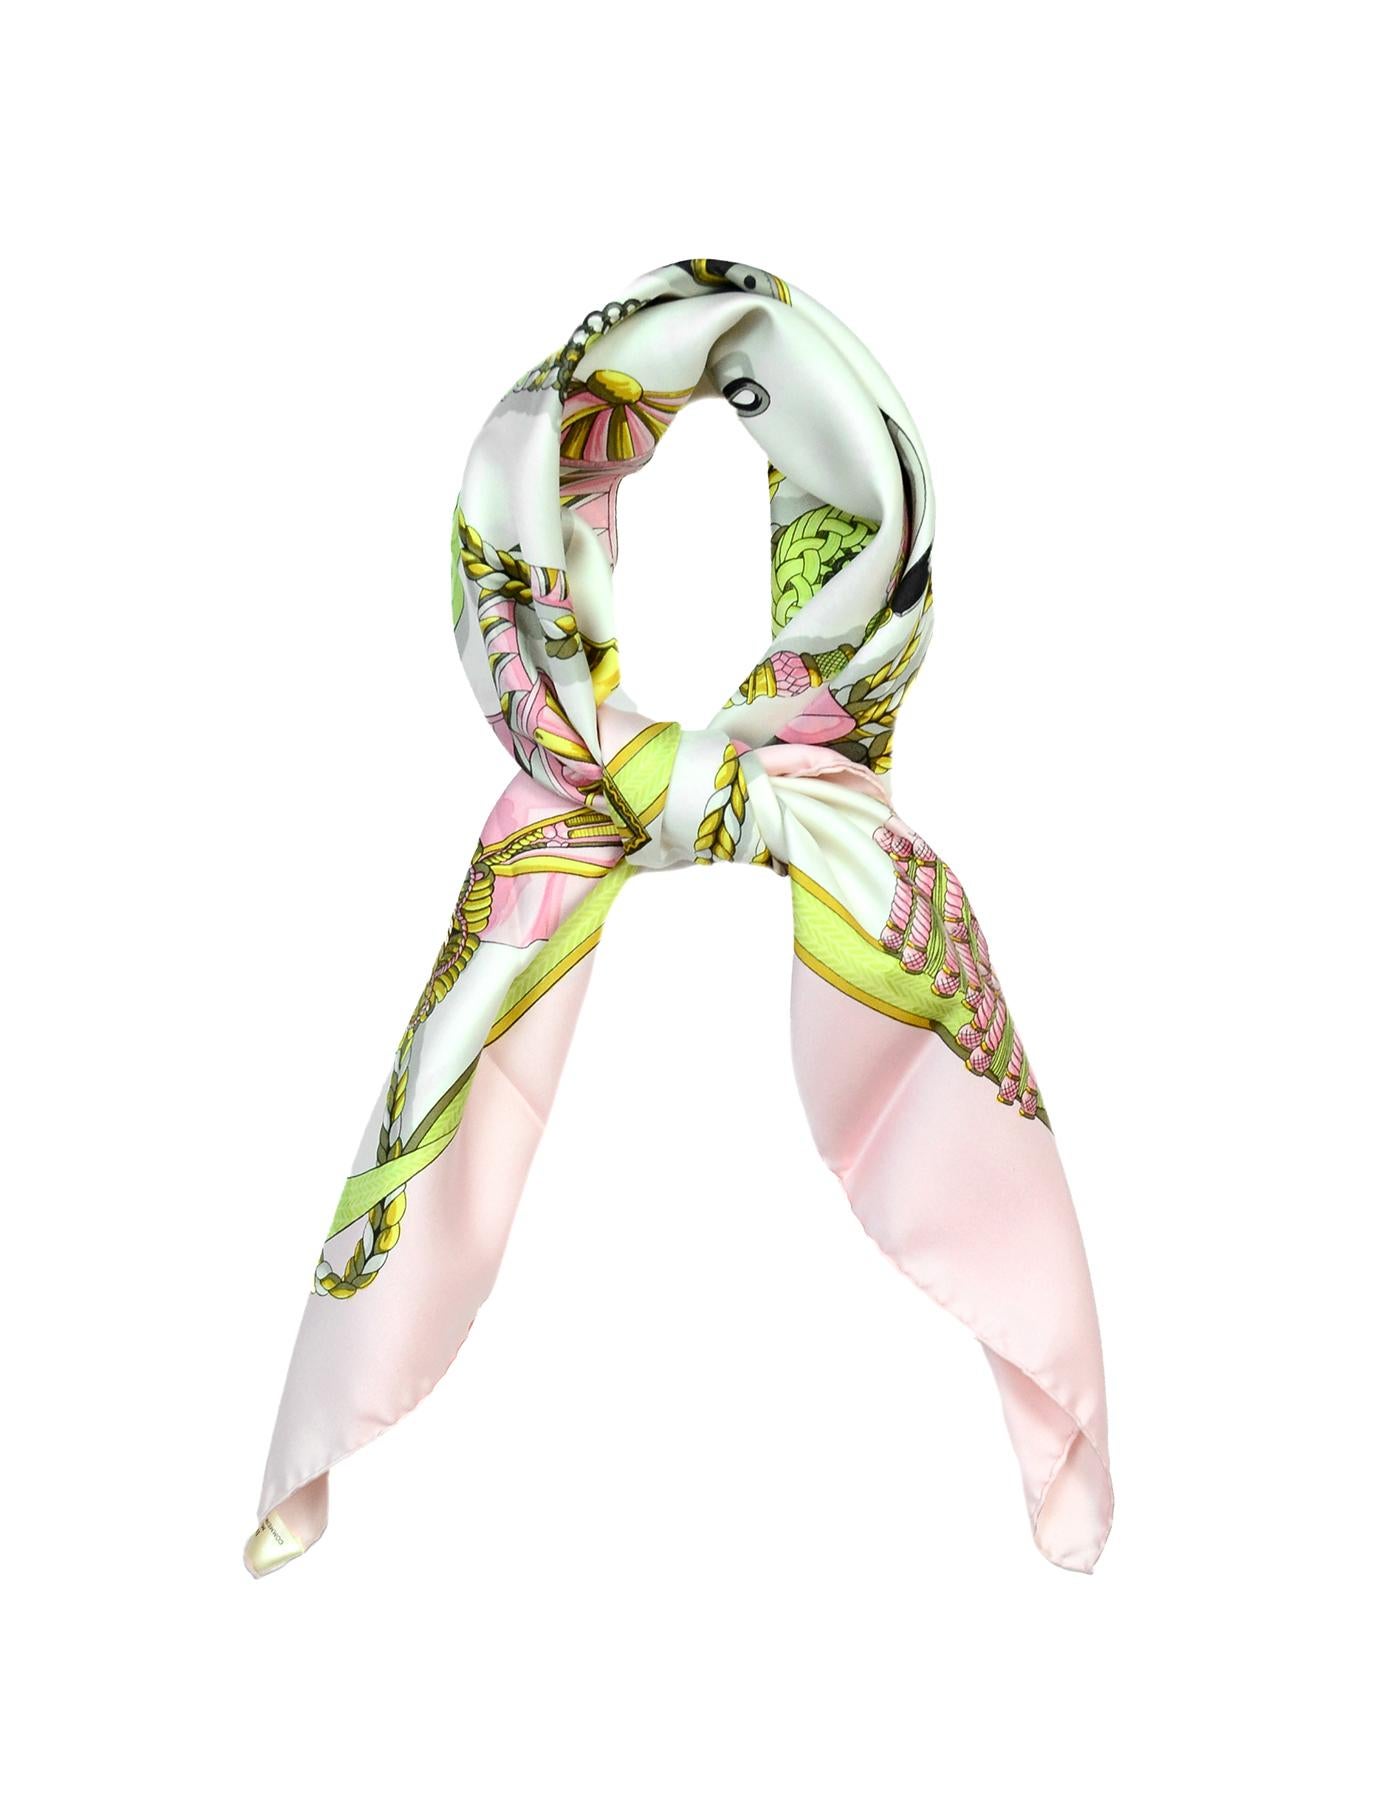 Hermes Pink/White Frontaux Et Cocardes Horse/Ribbon Print 90cm Silk Scarf

Made In:  France
Color: Pink and white
Materials: 100% silk
Overall Condition: Very good pre-owned condition with exception of some light staining 
Estimated Retail: $395 +